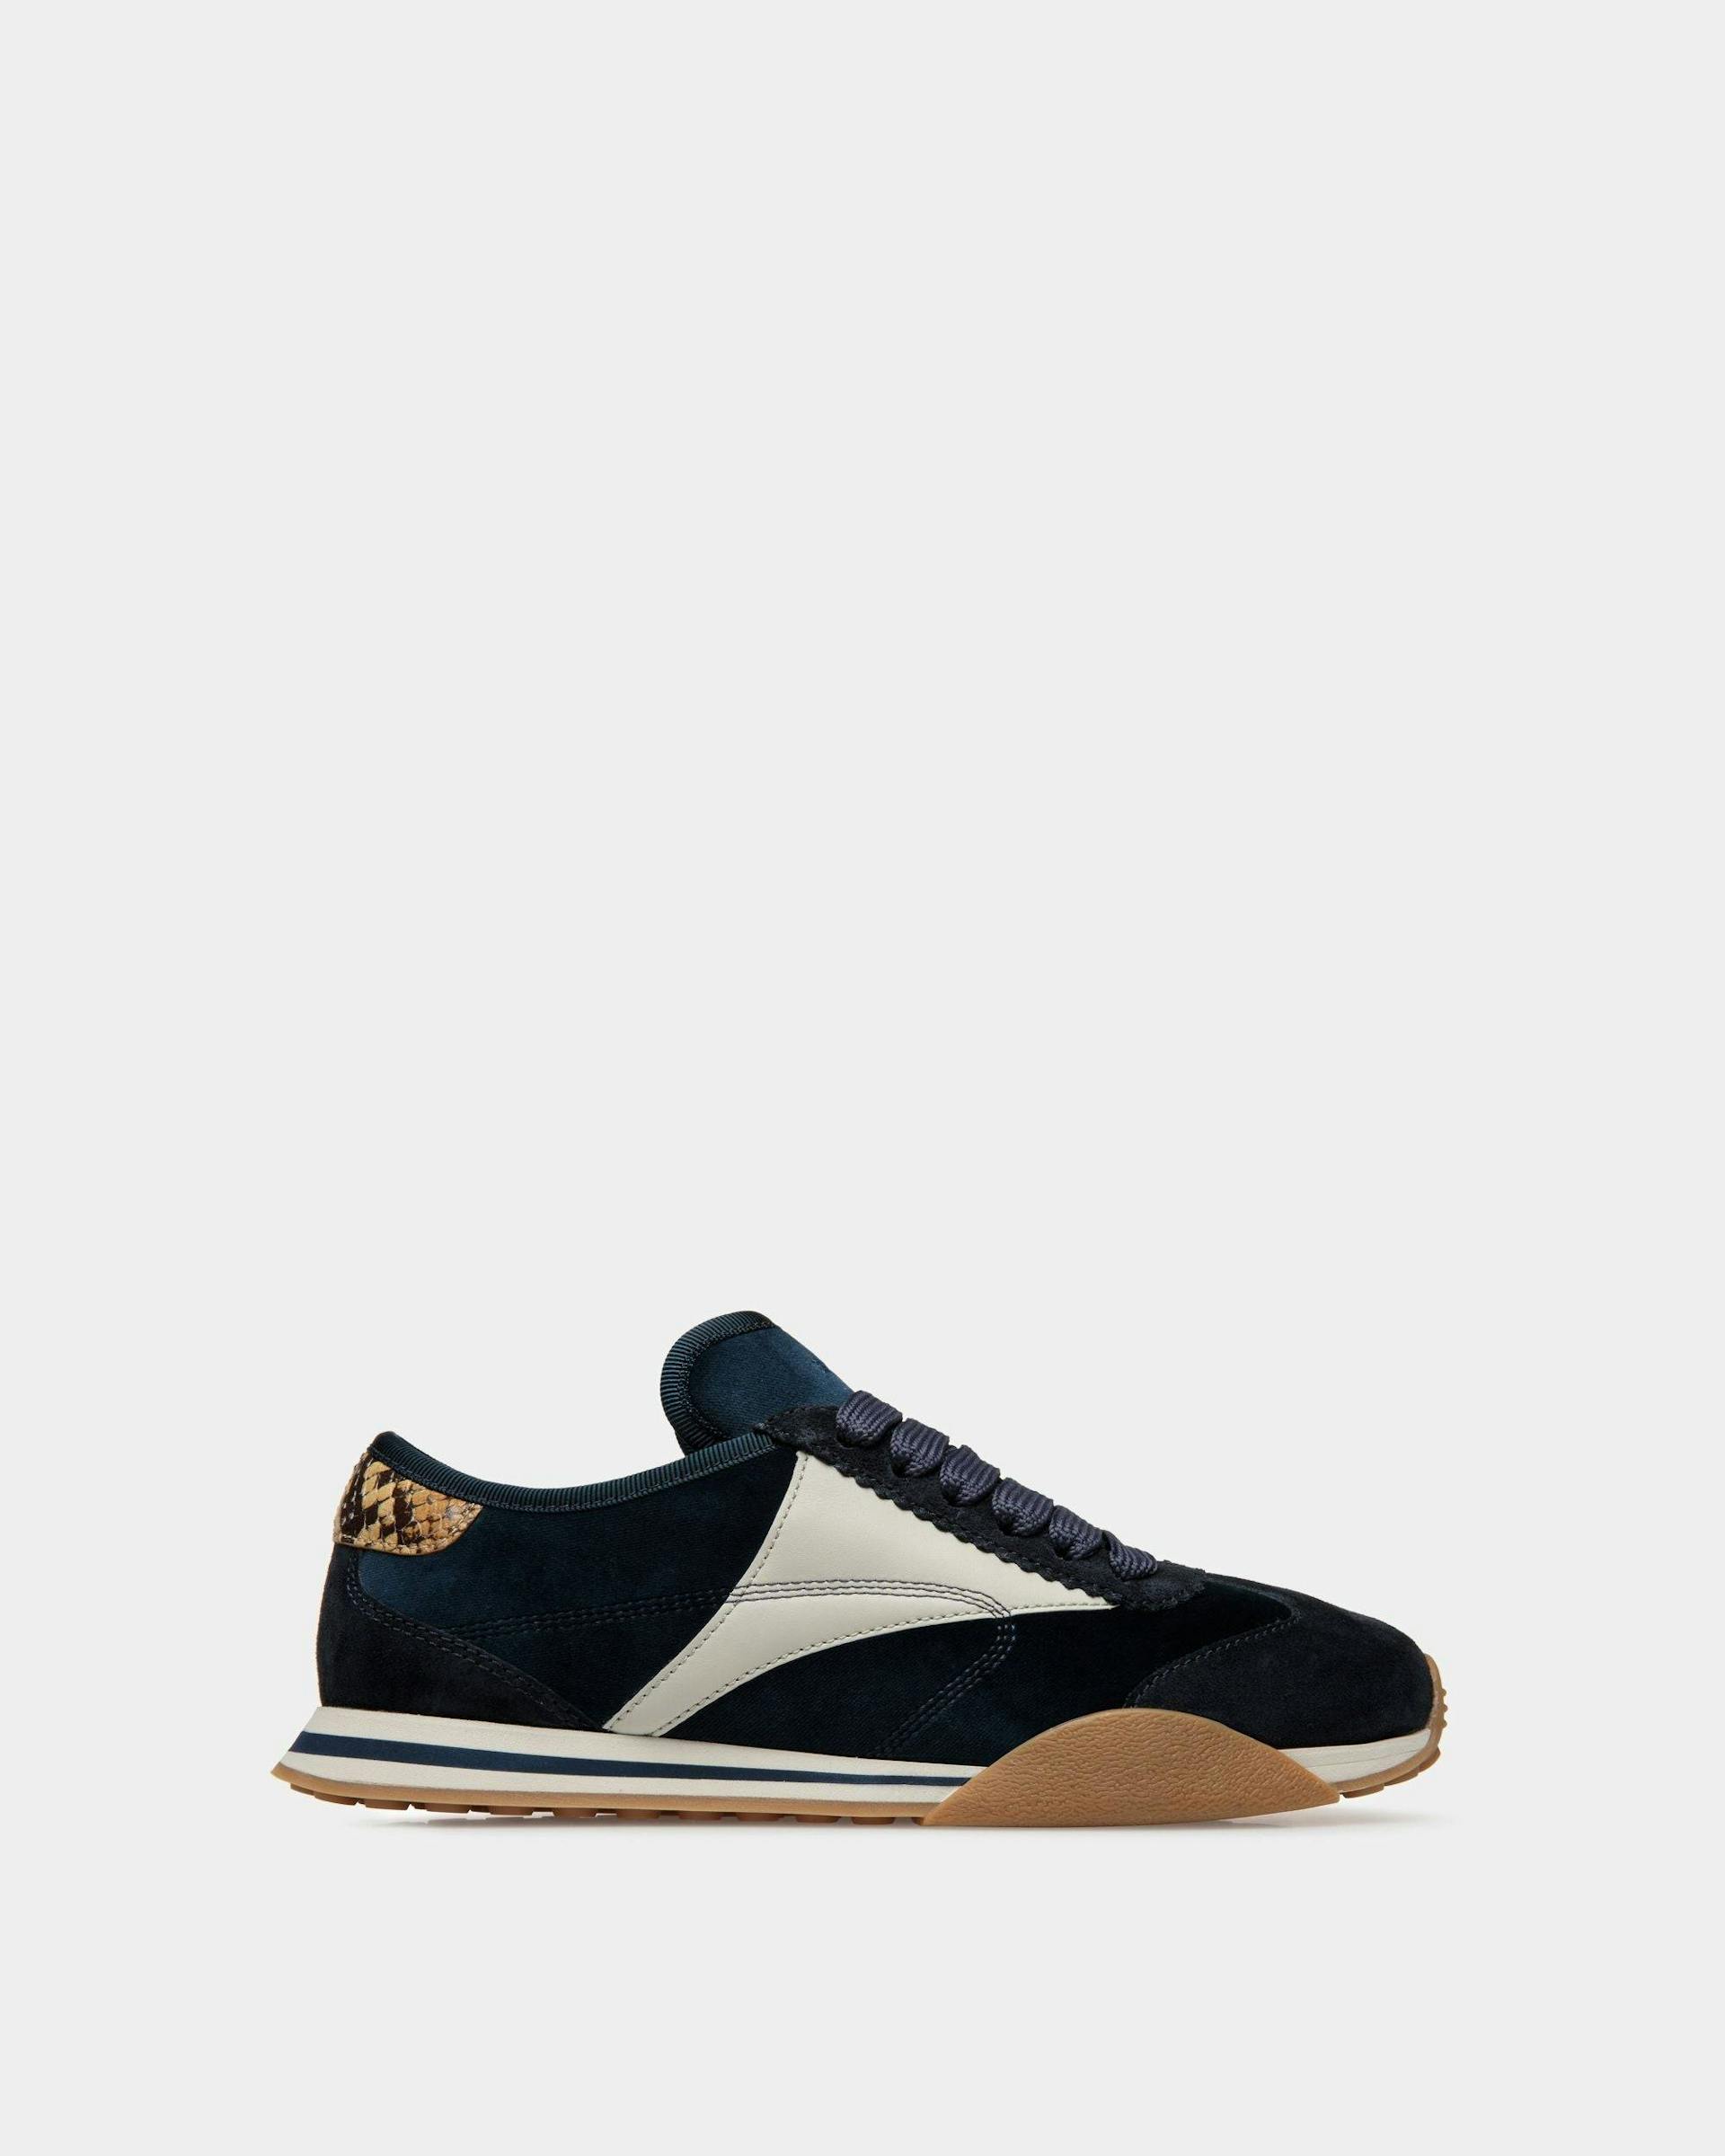 Sussex Sneakers In Midnight And Dusty White Leather And Cotton - Women's - Bally - 01